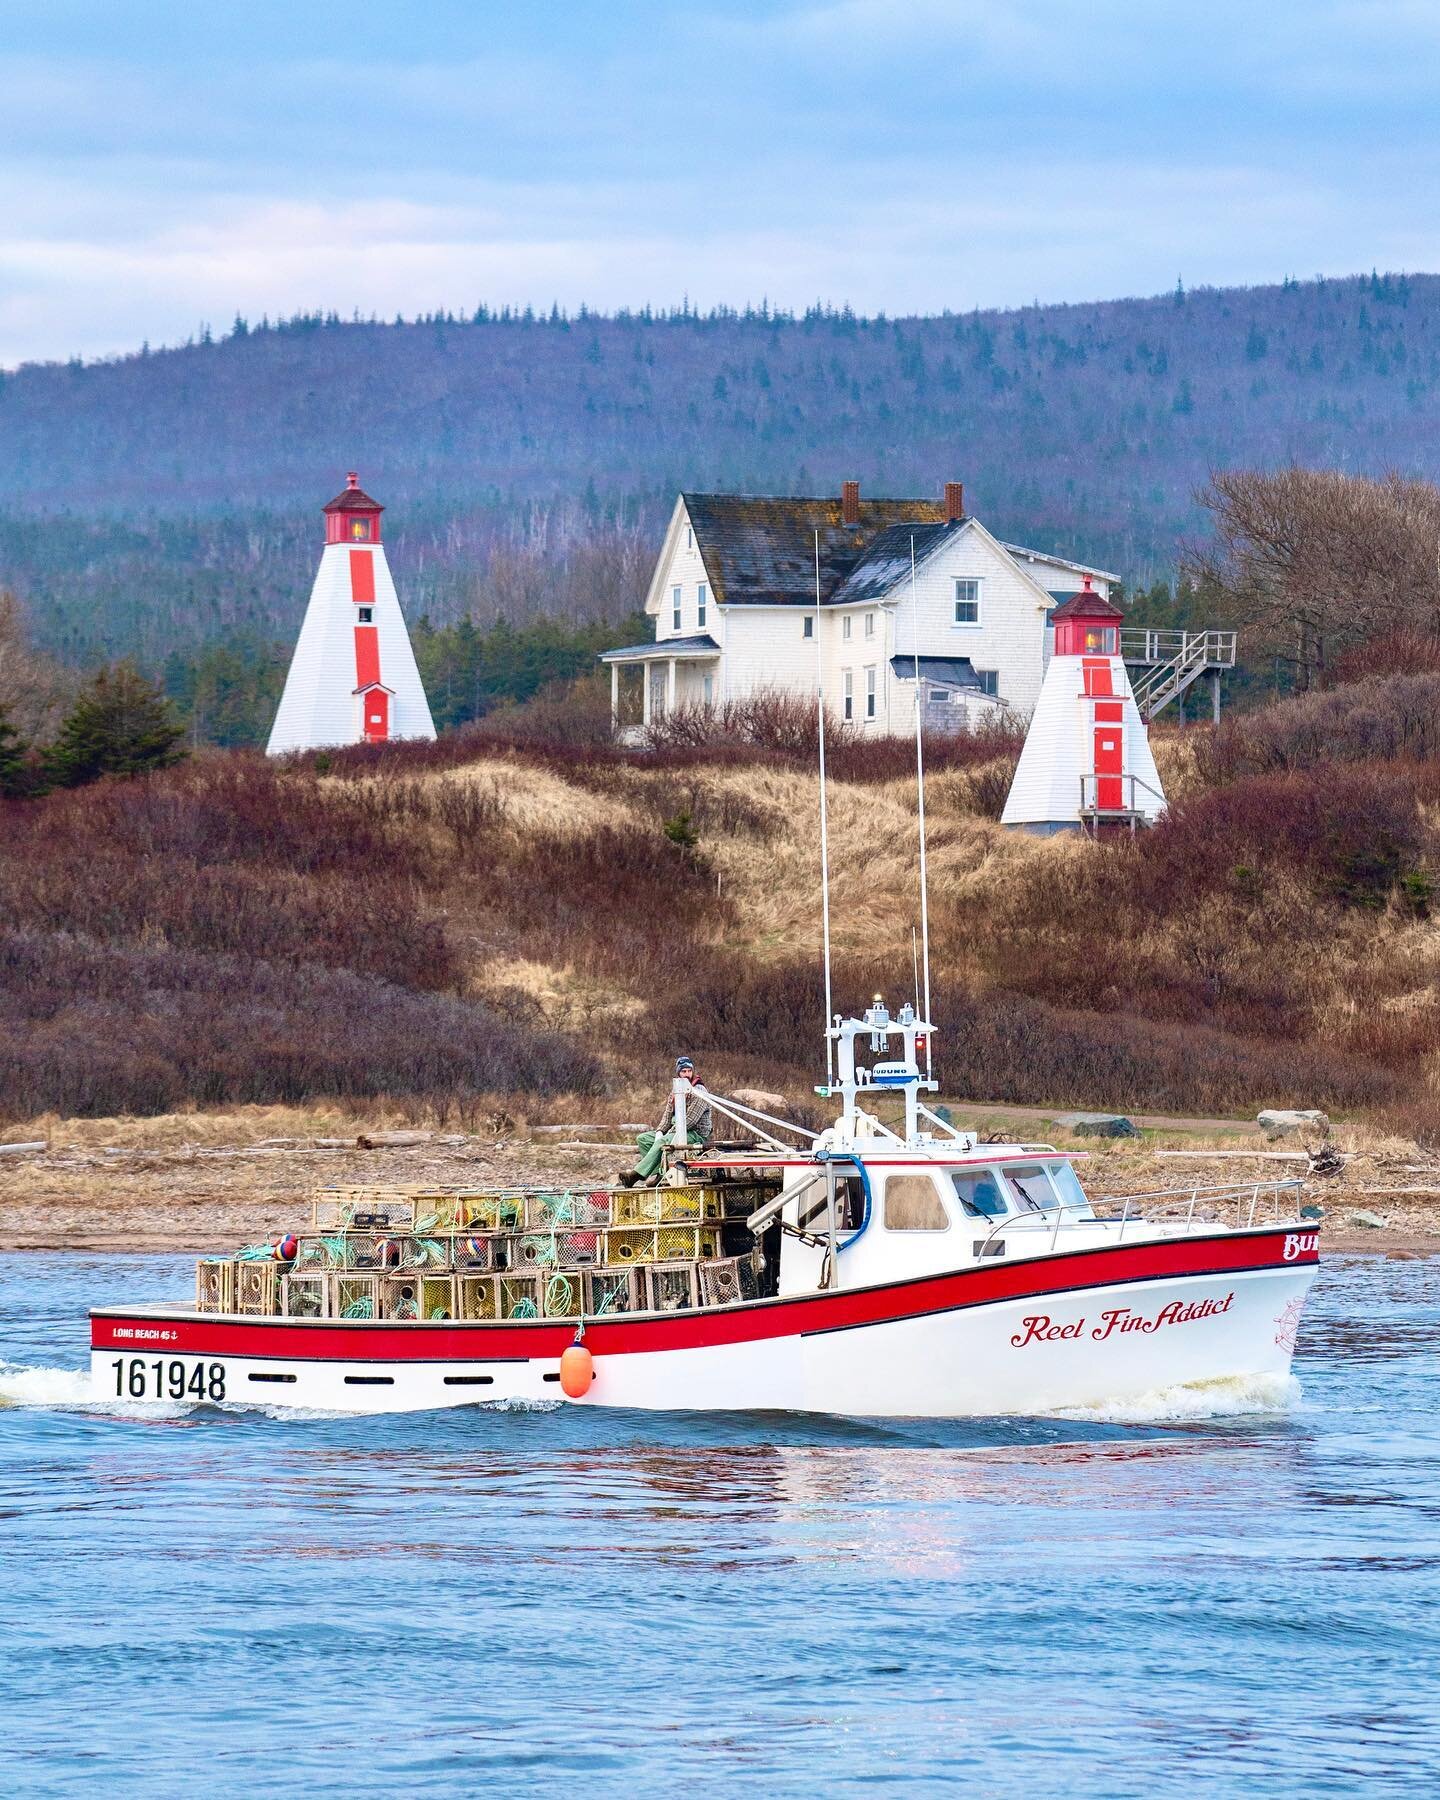 Fishing boats and lighthouses, what more could you ask for. Feeling happy + thankful to live by the ocean. Photos from Margaree Harbour Setting Day - the start of lobster fishing season. 🦞 May 6th, 2023

#capebreton #settingday #margaree #visitnovas